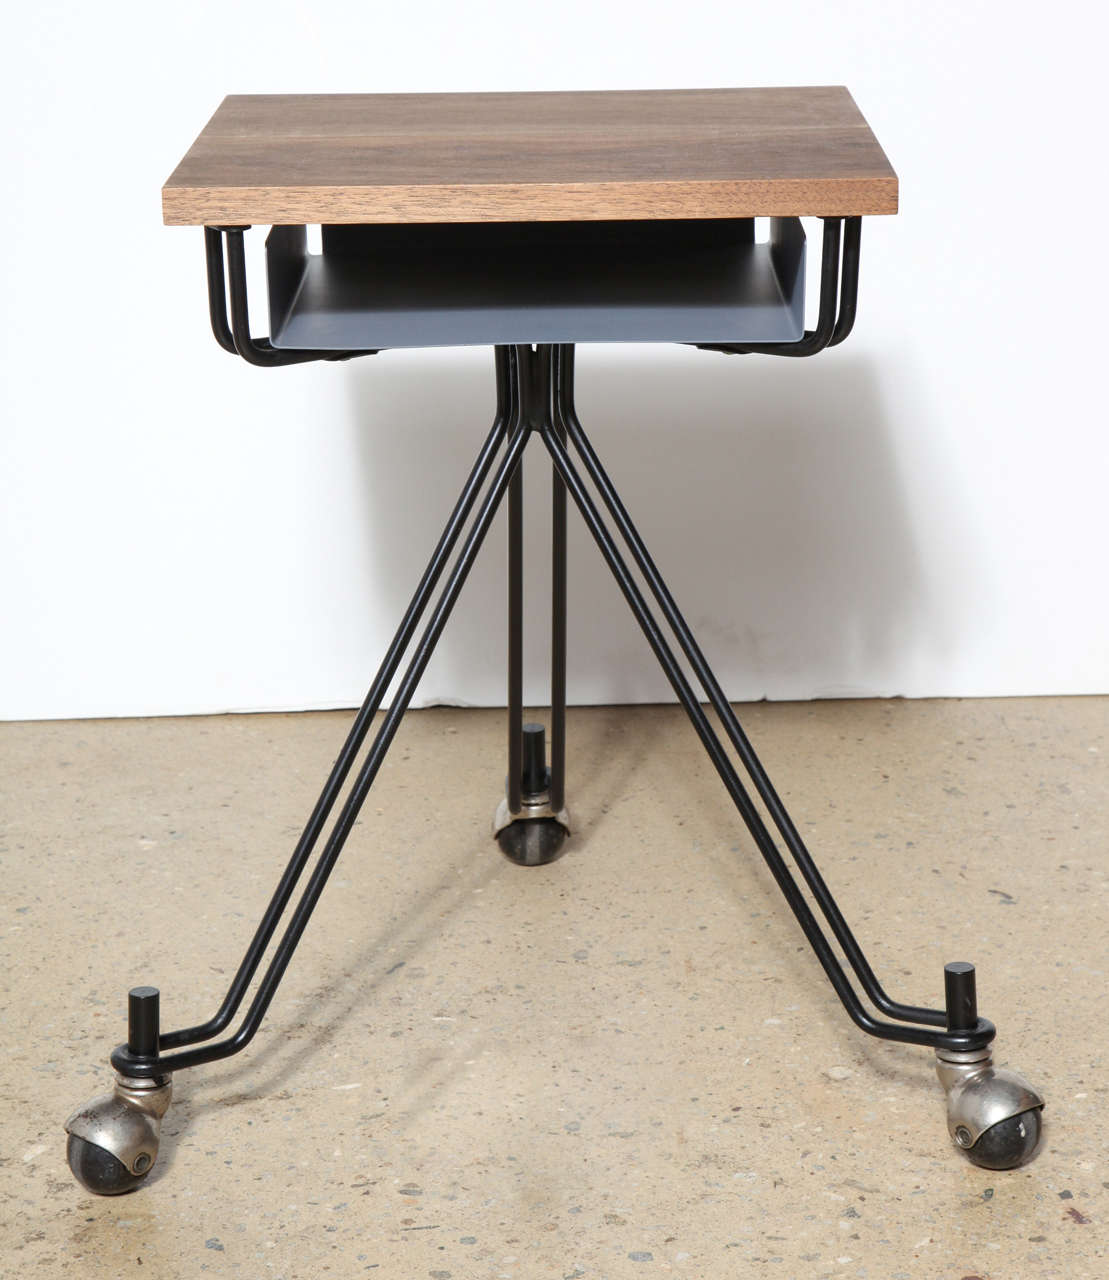 Mid 20th Century pair of Eliot Noyes designed IBM Rolling Typewriter Stands. Featuring Black enameled Iron wire tripod legs, 3 round casters, lower Gray enameled metal shelf with custom Solid Walnut Surface. Great rolling multi use Table for small,